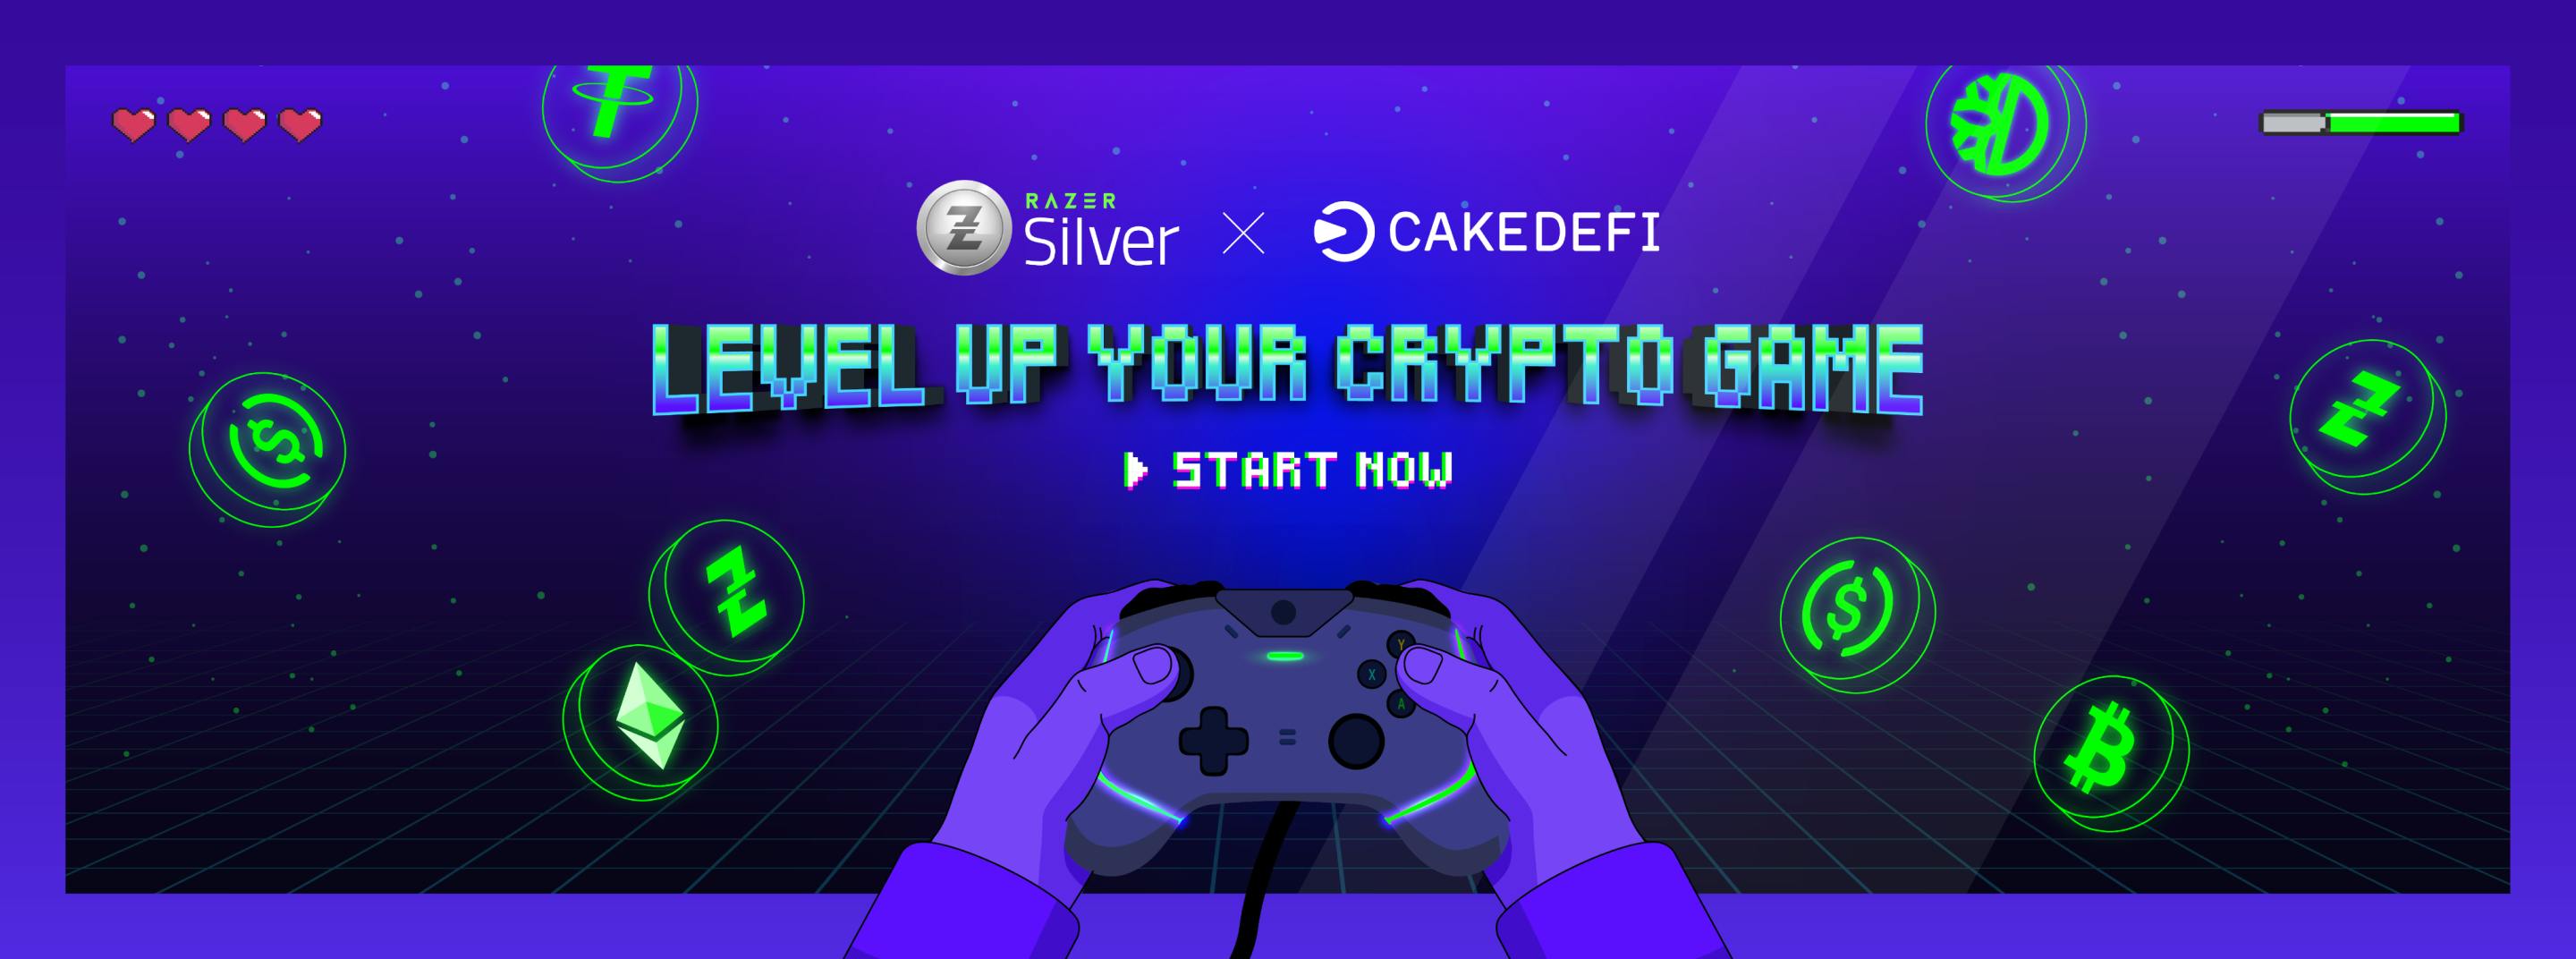 Cake DeFi Teams up With Razer Silver to Bake a Special Offer For Crypto & Gaming Fans